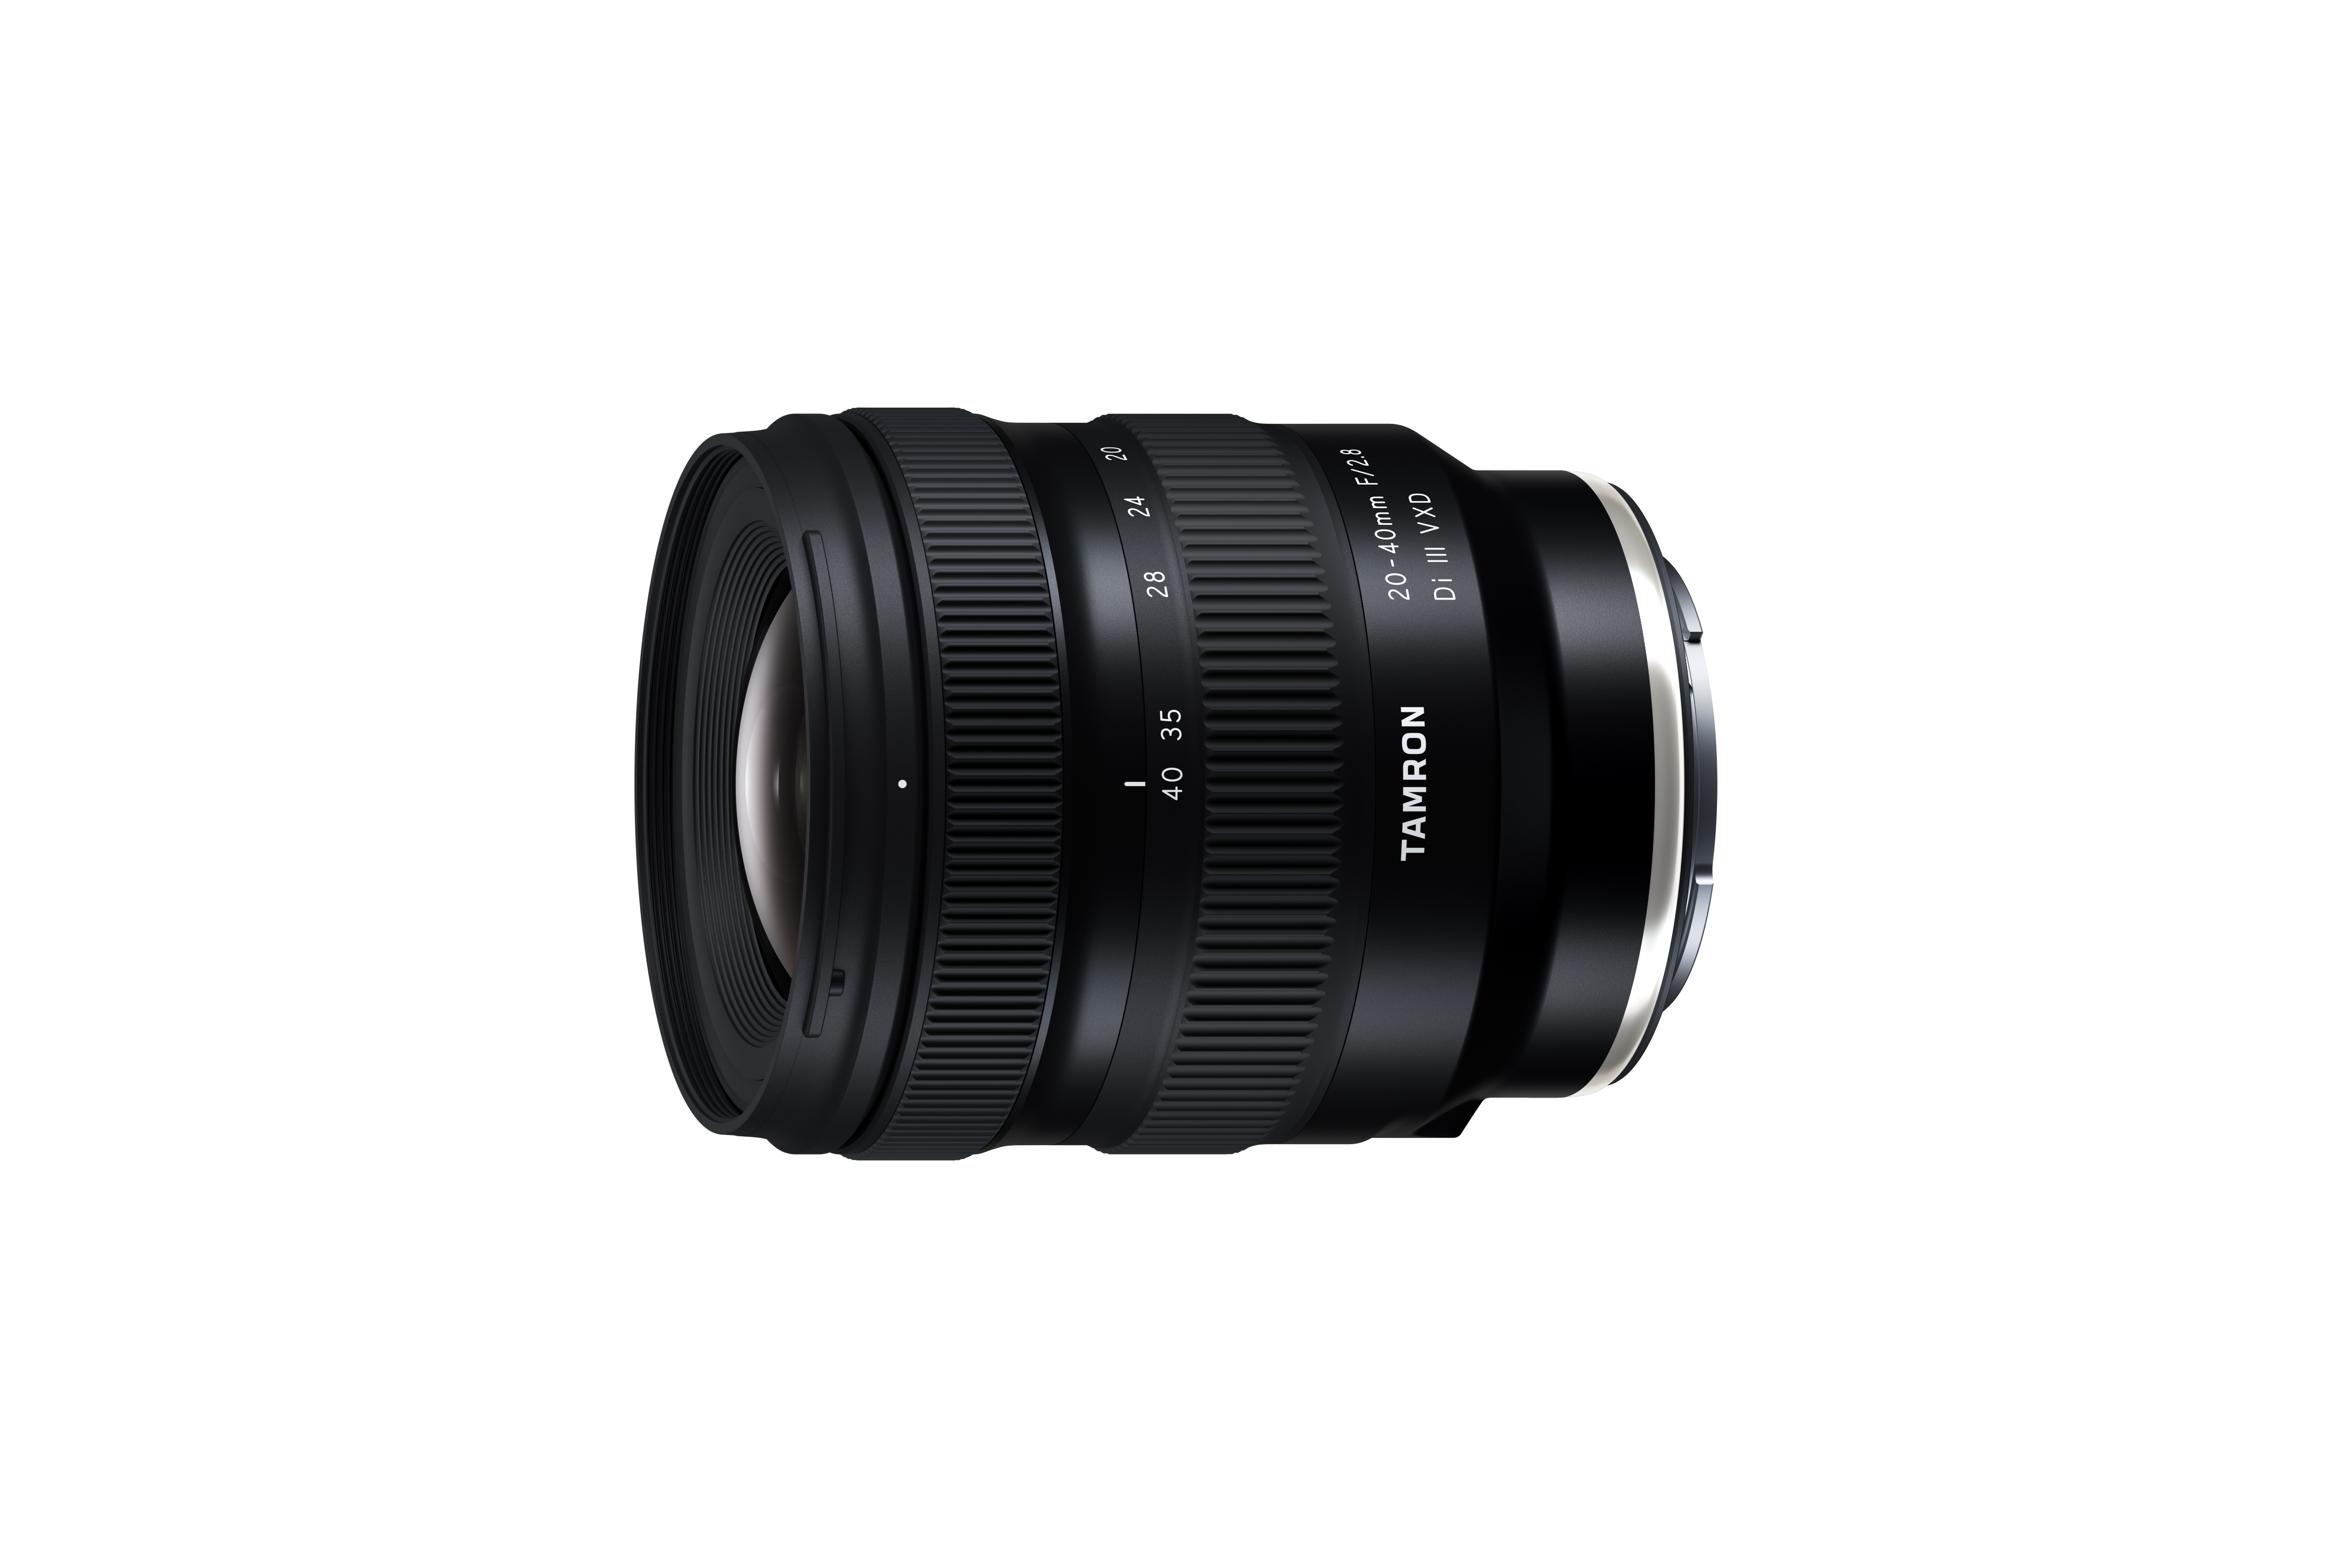 Tamron announces the launch of 20-40mm F/2.8 Di III VXD (Model A062) for  Sony E-mount full-frame mirrorless cameras | News | TAMRON